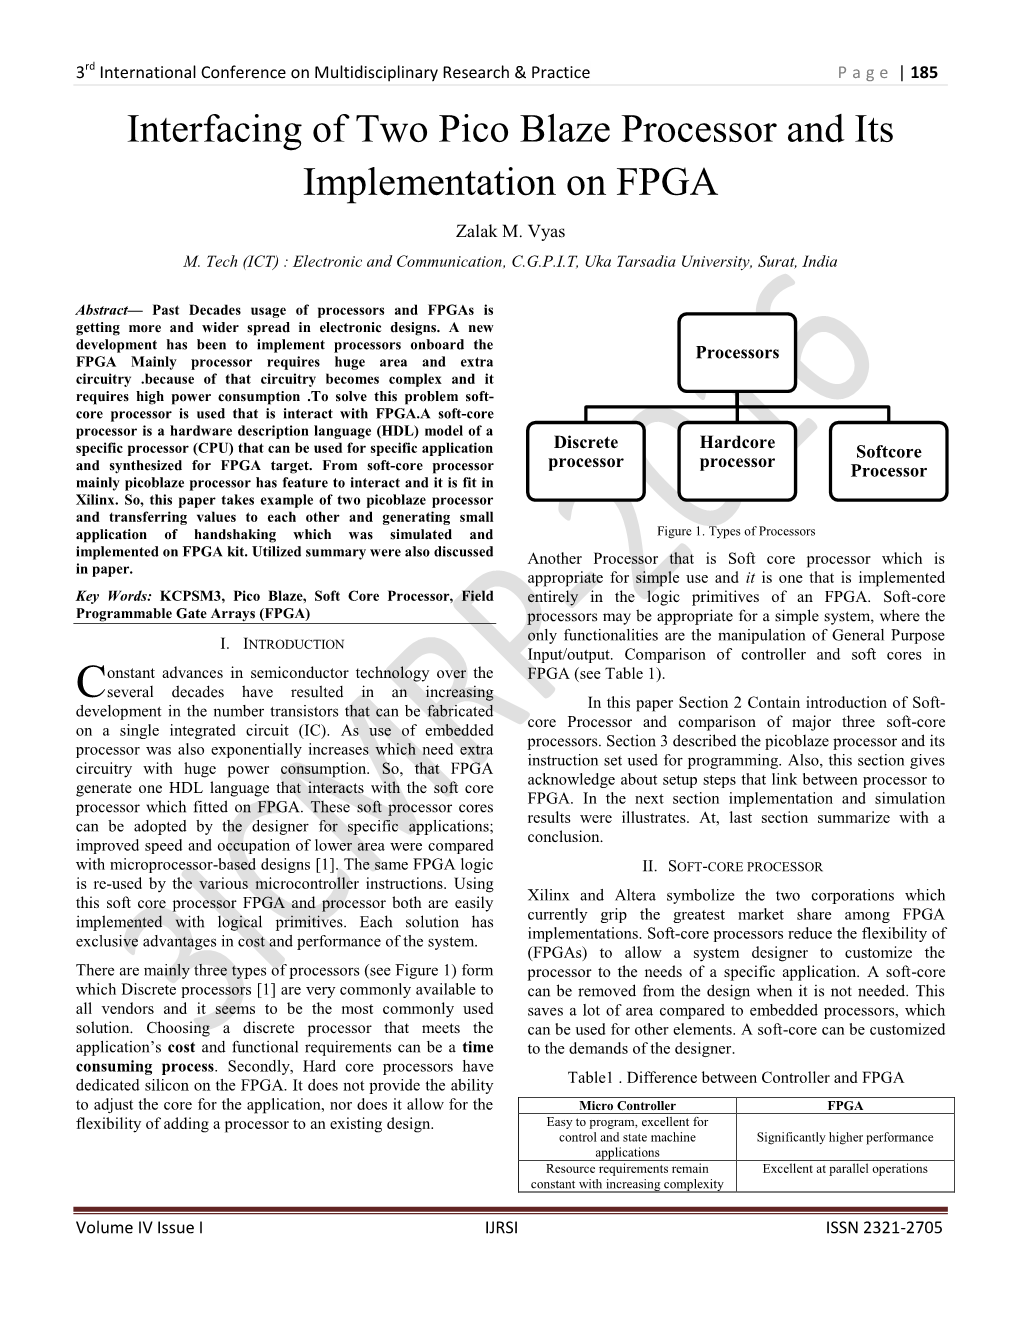 Interfacing of Two Pico Blaze Processor and Its Implementation on FPGA